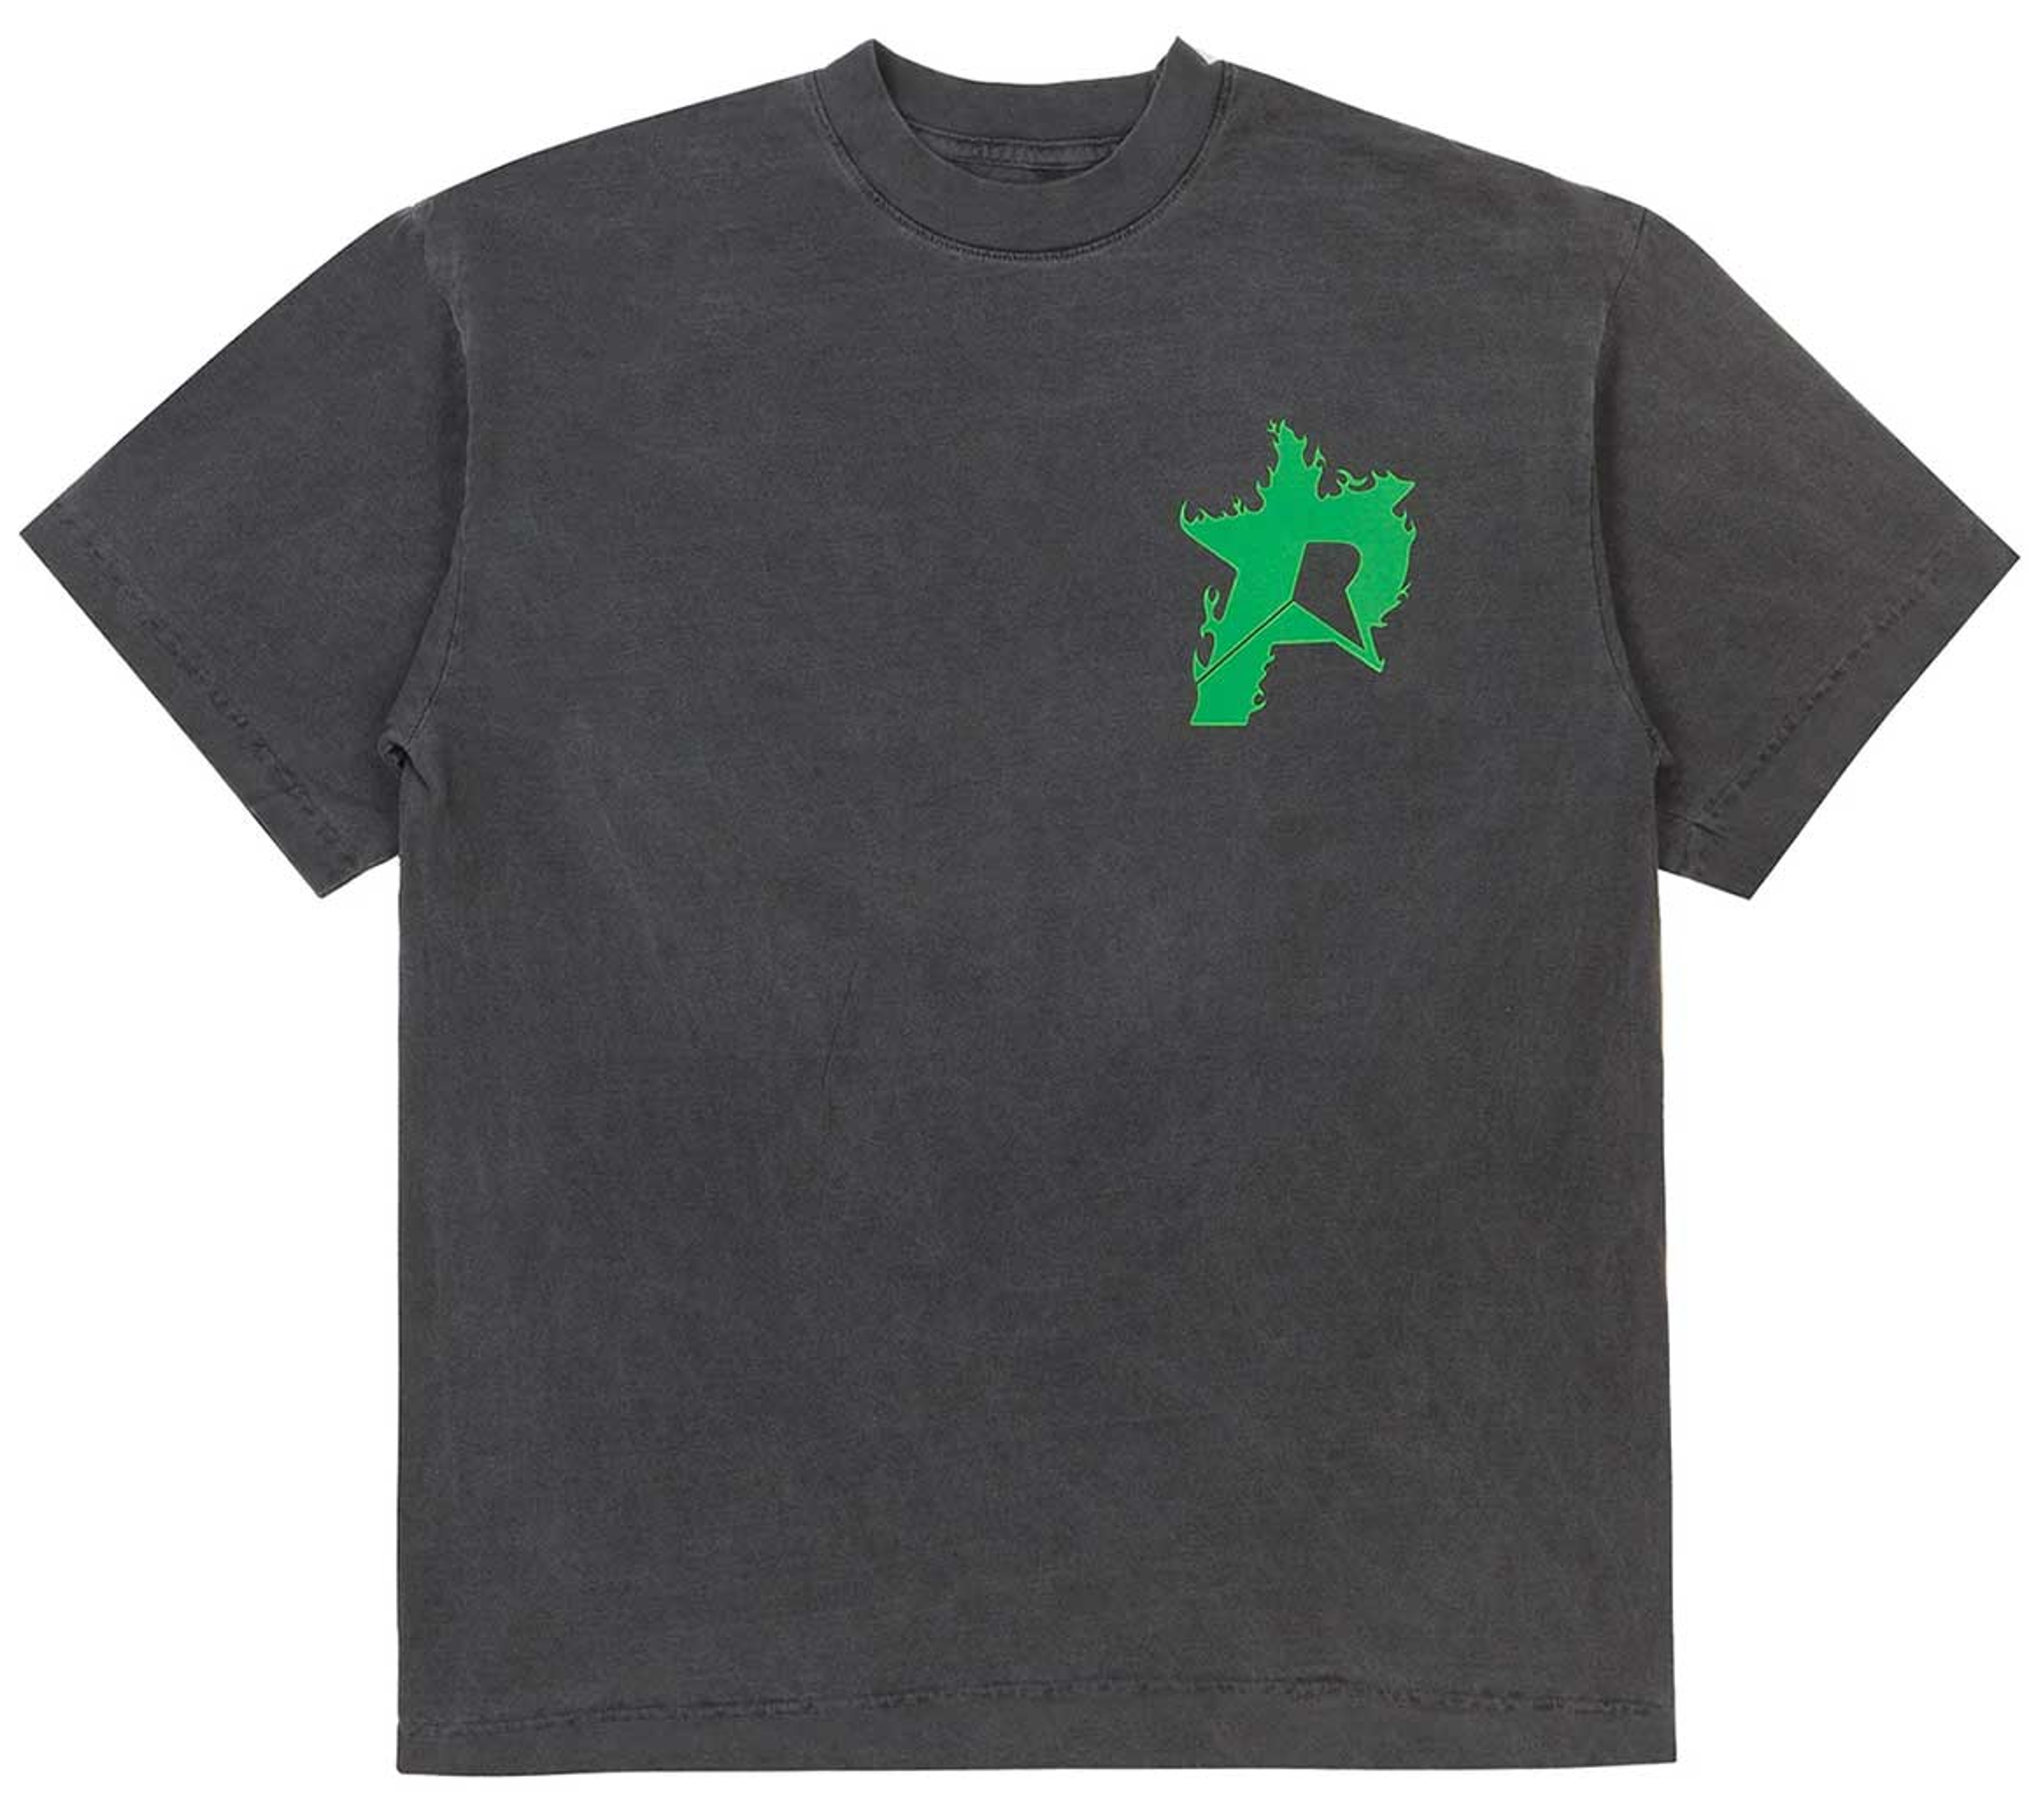 Pieces P Star Green Flames T-Shirt Washed Black